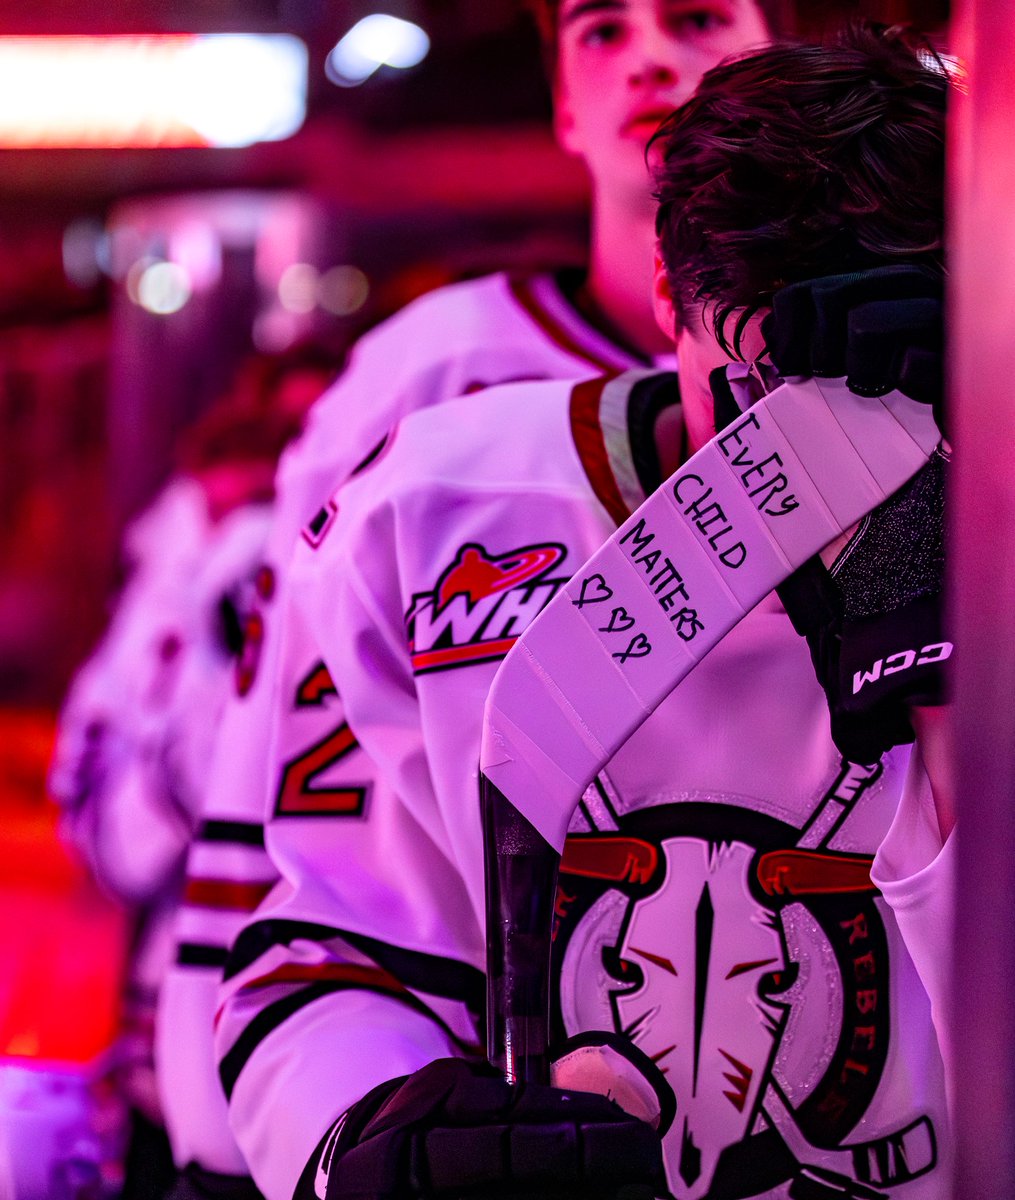 NEW: '#EveryChildMatters' is what @Rebelshockey's Dwayne Jean Jr. (@dwaynejeanjr), who's Cree & Dene, wrote on his stick during a game last week. He talked to @rdnewsNOW about the message | READ: rdnewsnow.com/2023/10/06/reb… | #RedDeer #NDTR @TheWHL @CHLHockey @BIG105 @1067rewindradio